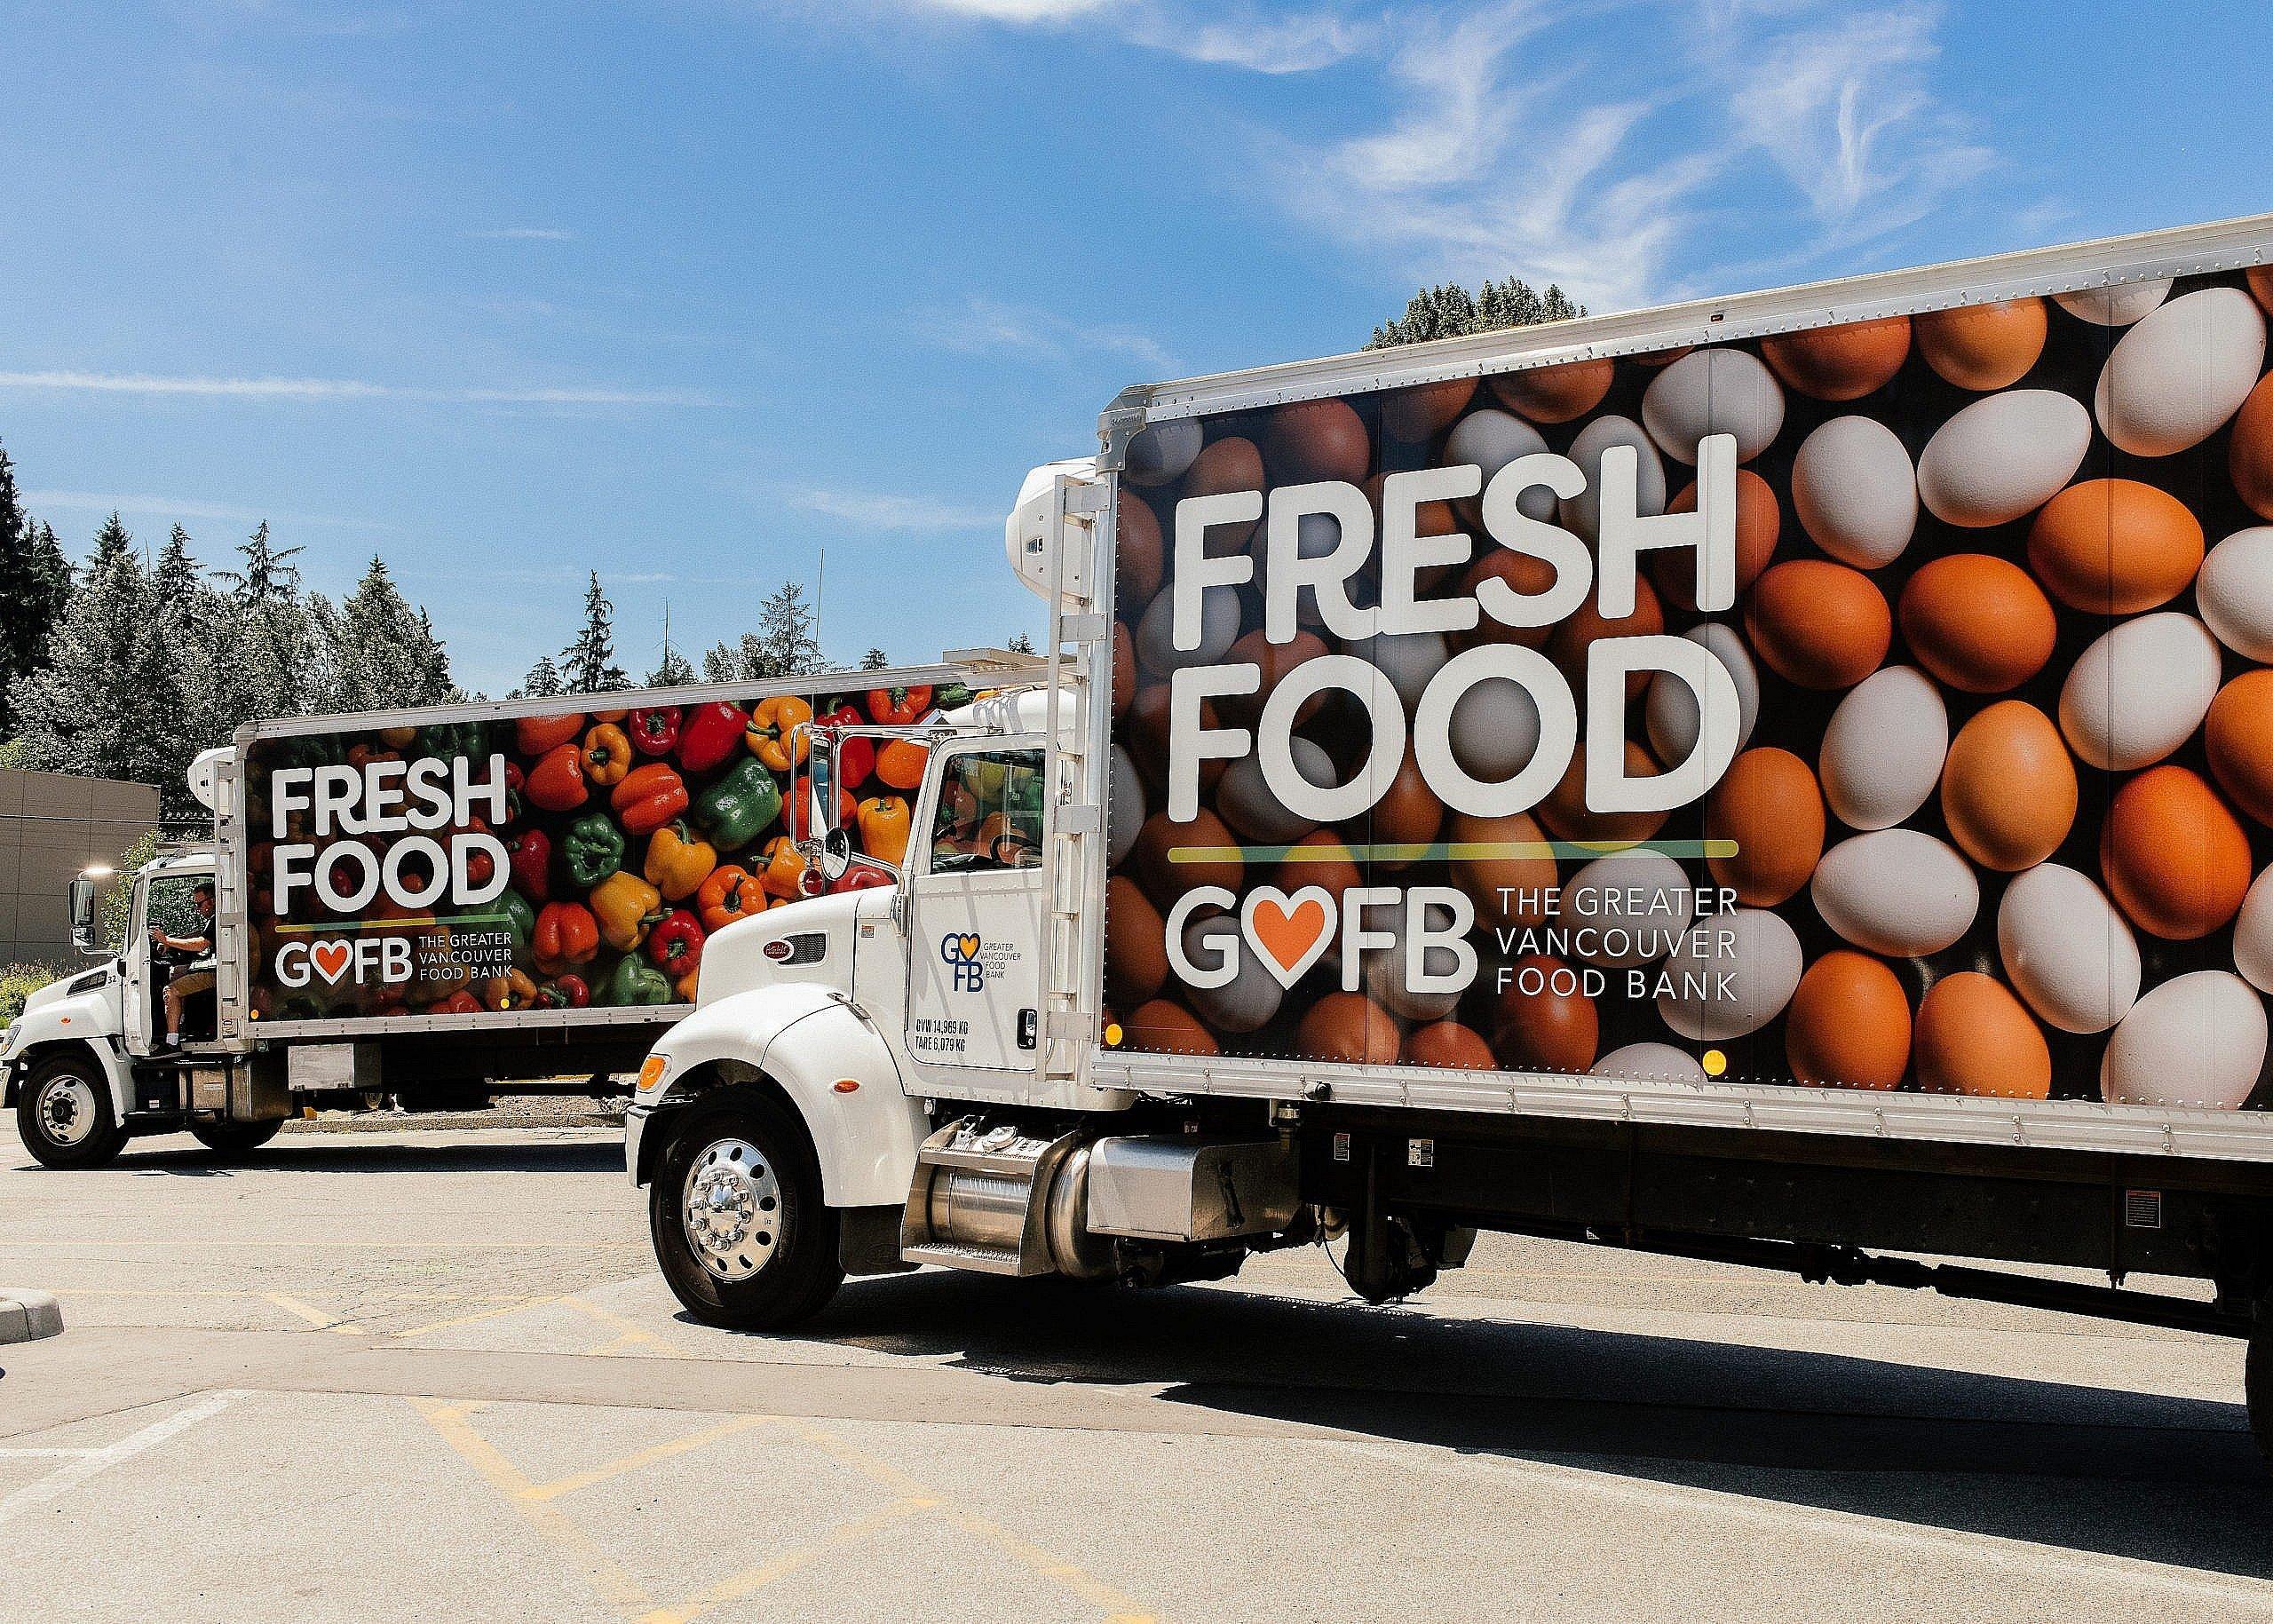 Two trucks with the words "Fresh Food" on them, with various coloured eggs on the side of the truck